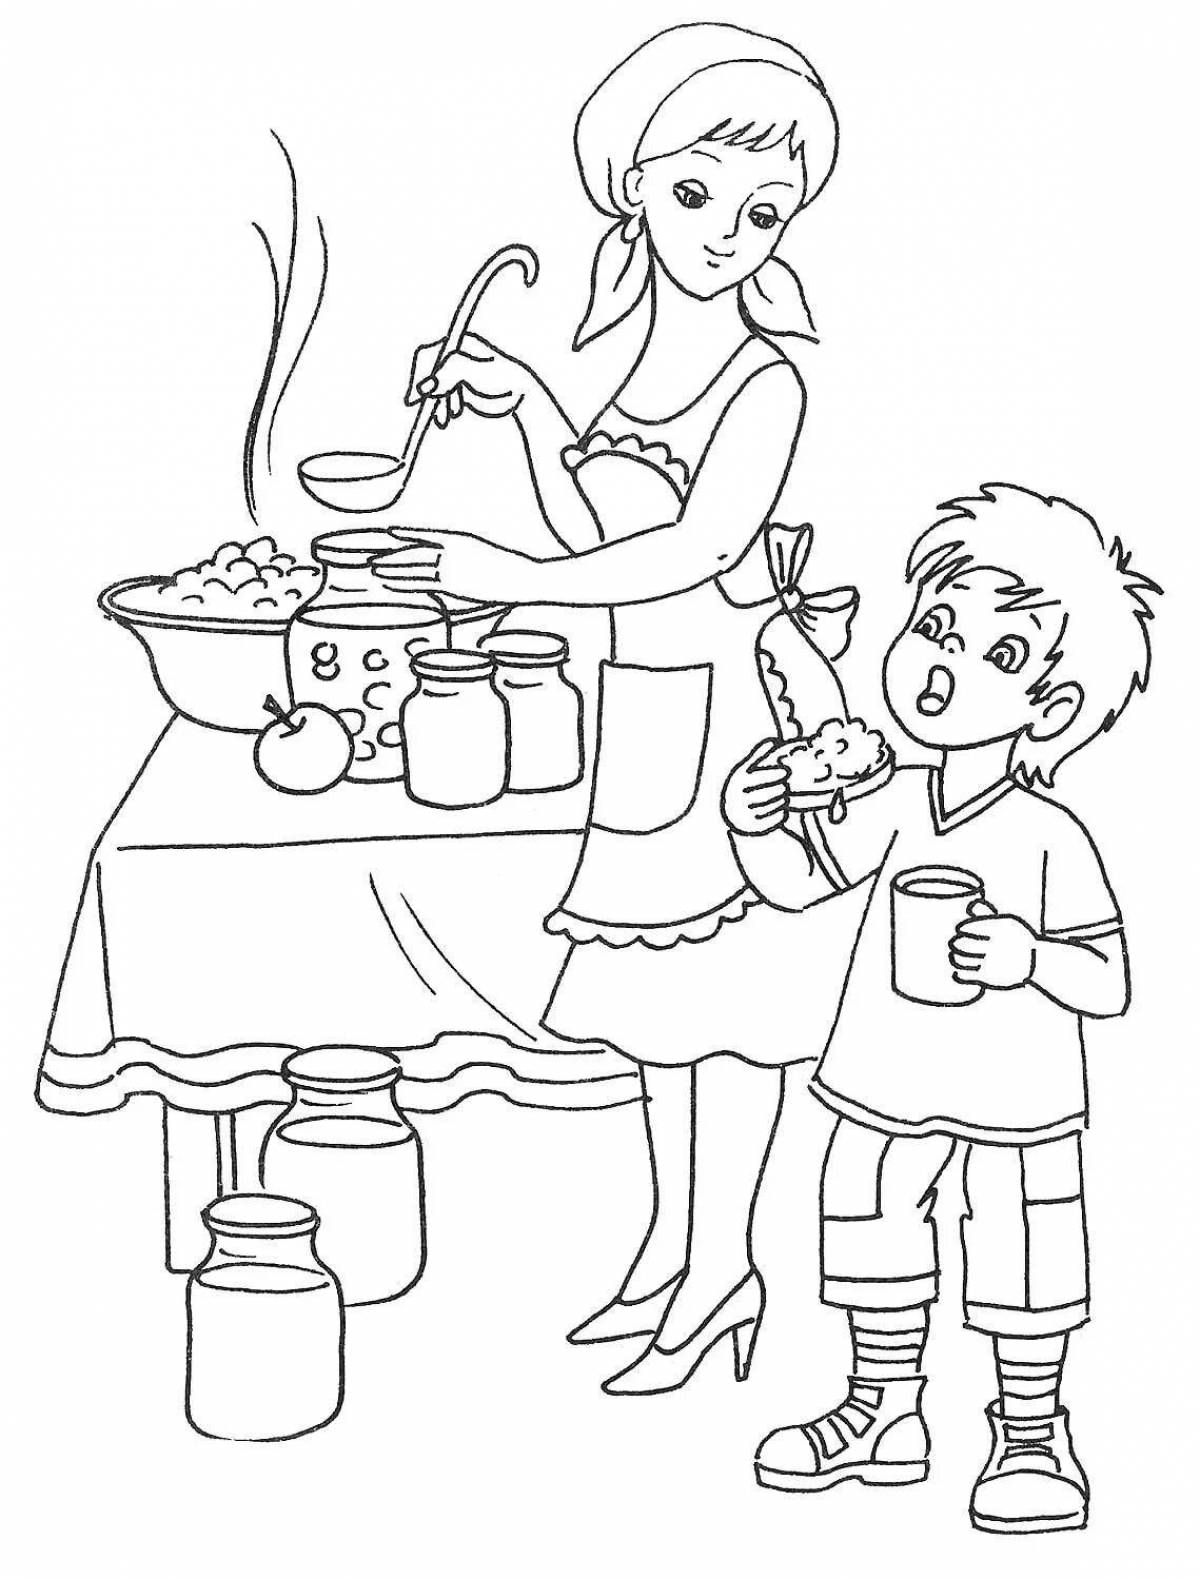 Coloring book glittering housewife